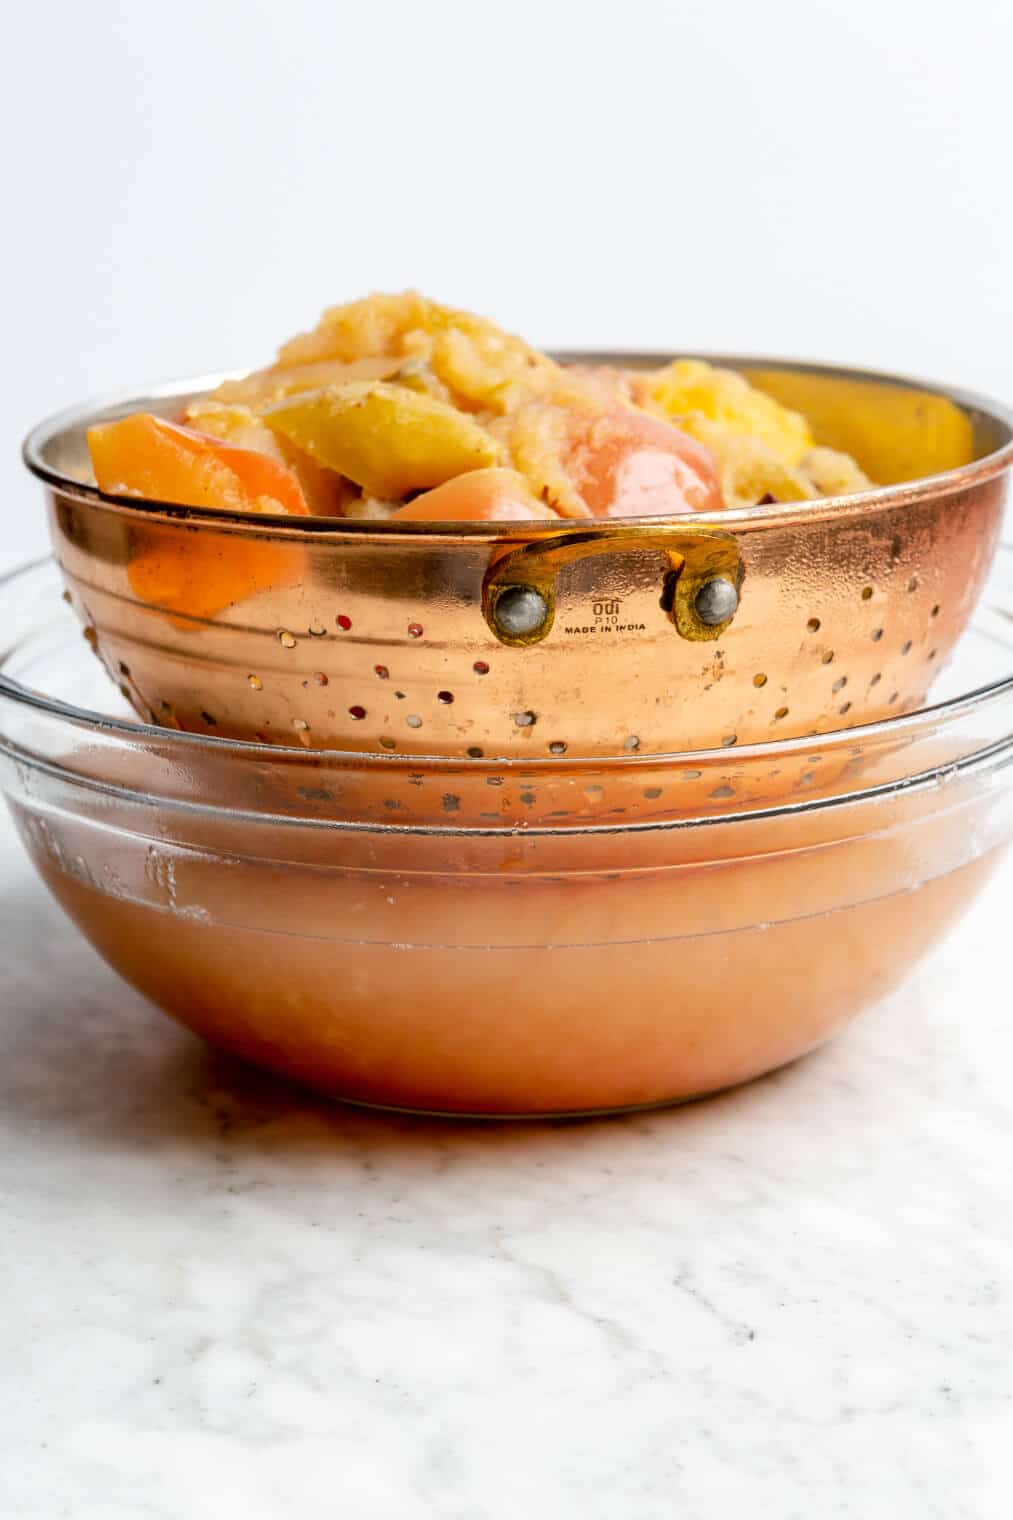 Side view of a strainer with cooked apples and spices and liquid in a large glass bowl.